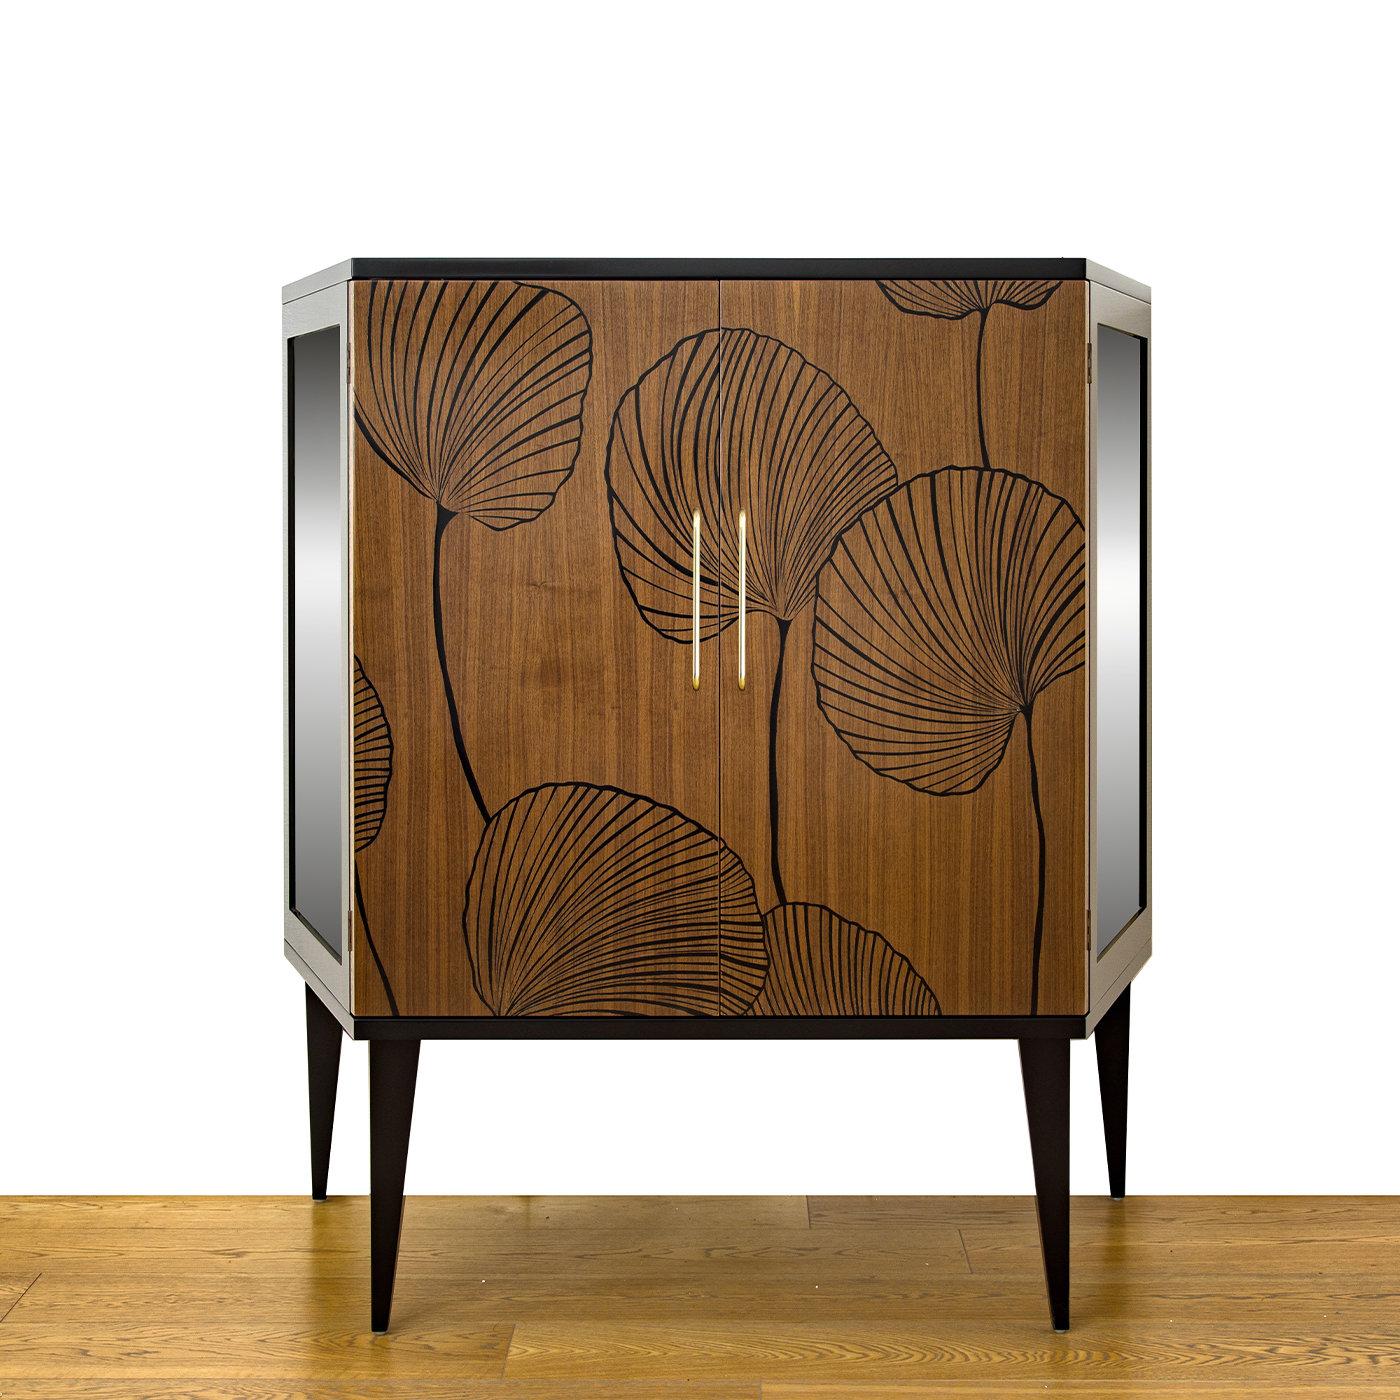 This lovely walnut wood shoe cabinet shows that practicality can be elegant. The cabinet features two walnut wood doors decorated with large, black Ginkgo leaves and brass handles, while the sides are in glass and Vienna straw for increased